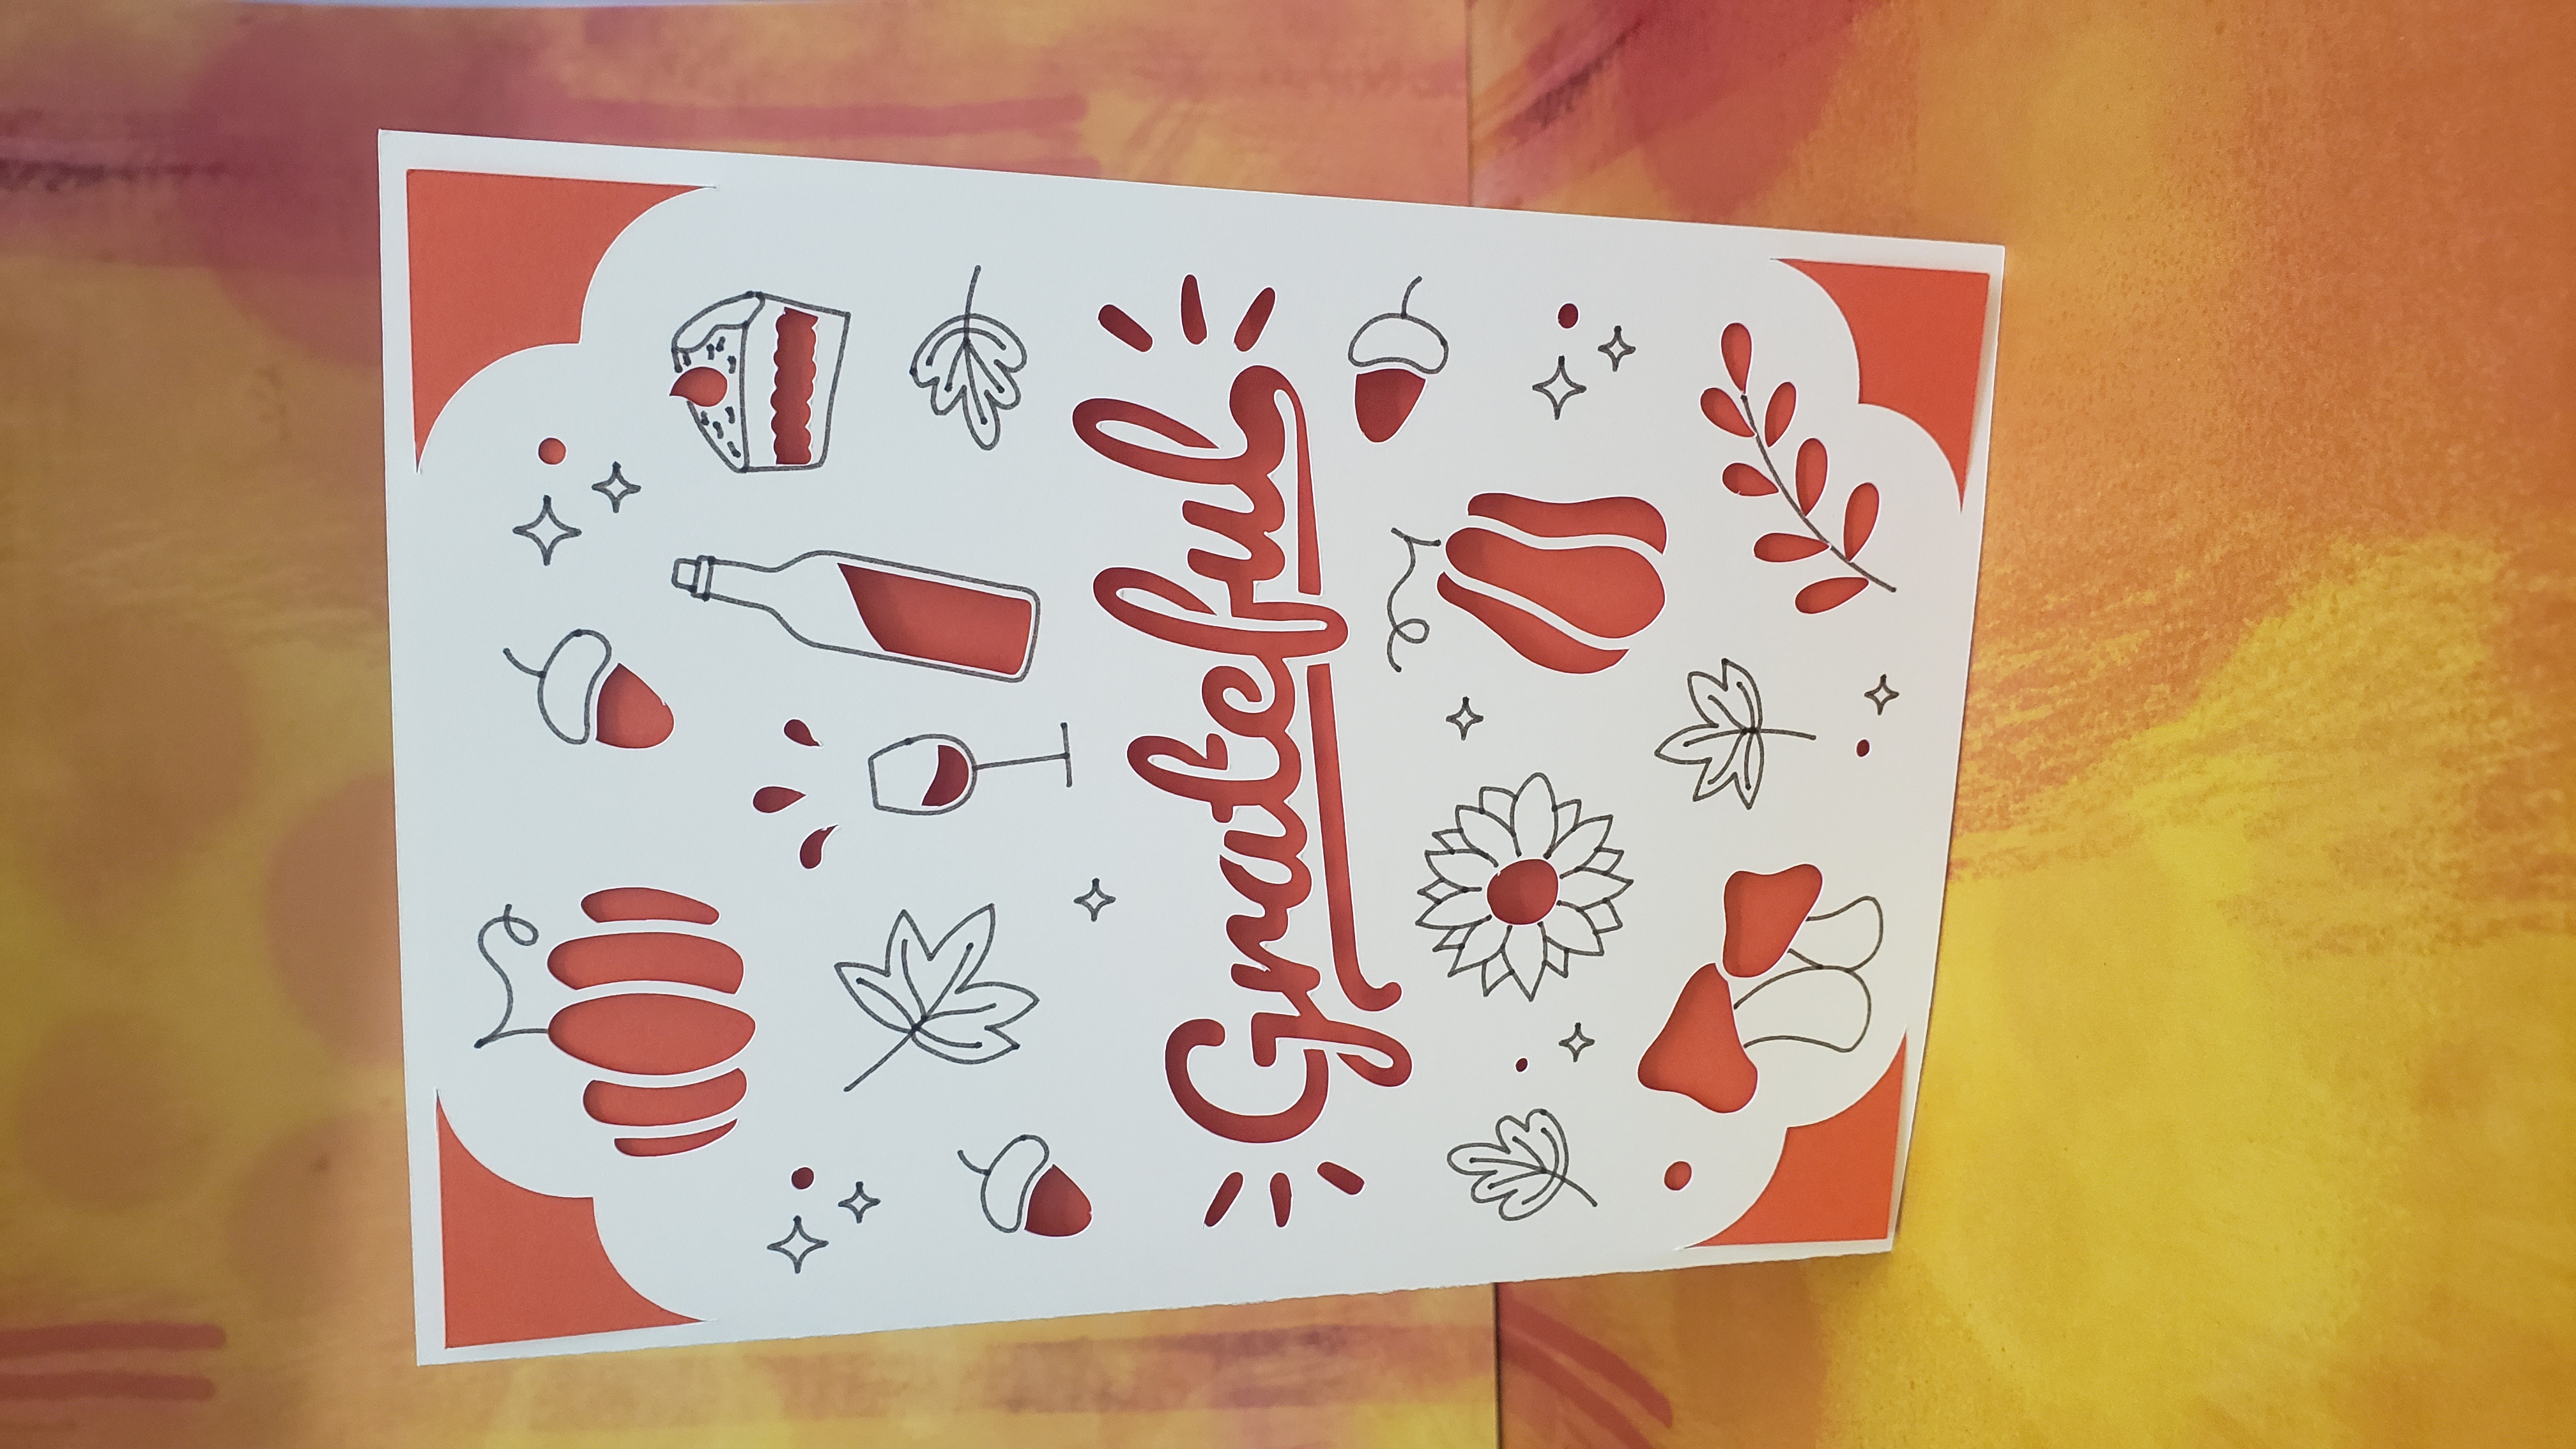 Orange and tan card reads "grateful" with fall decorations - pumpkins, pie, and flowers.